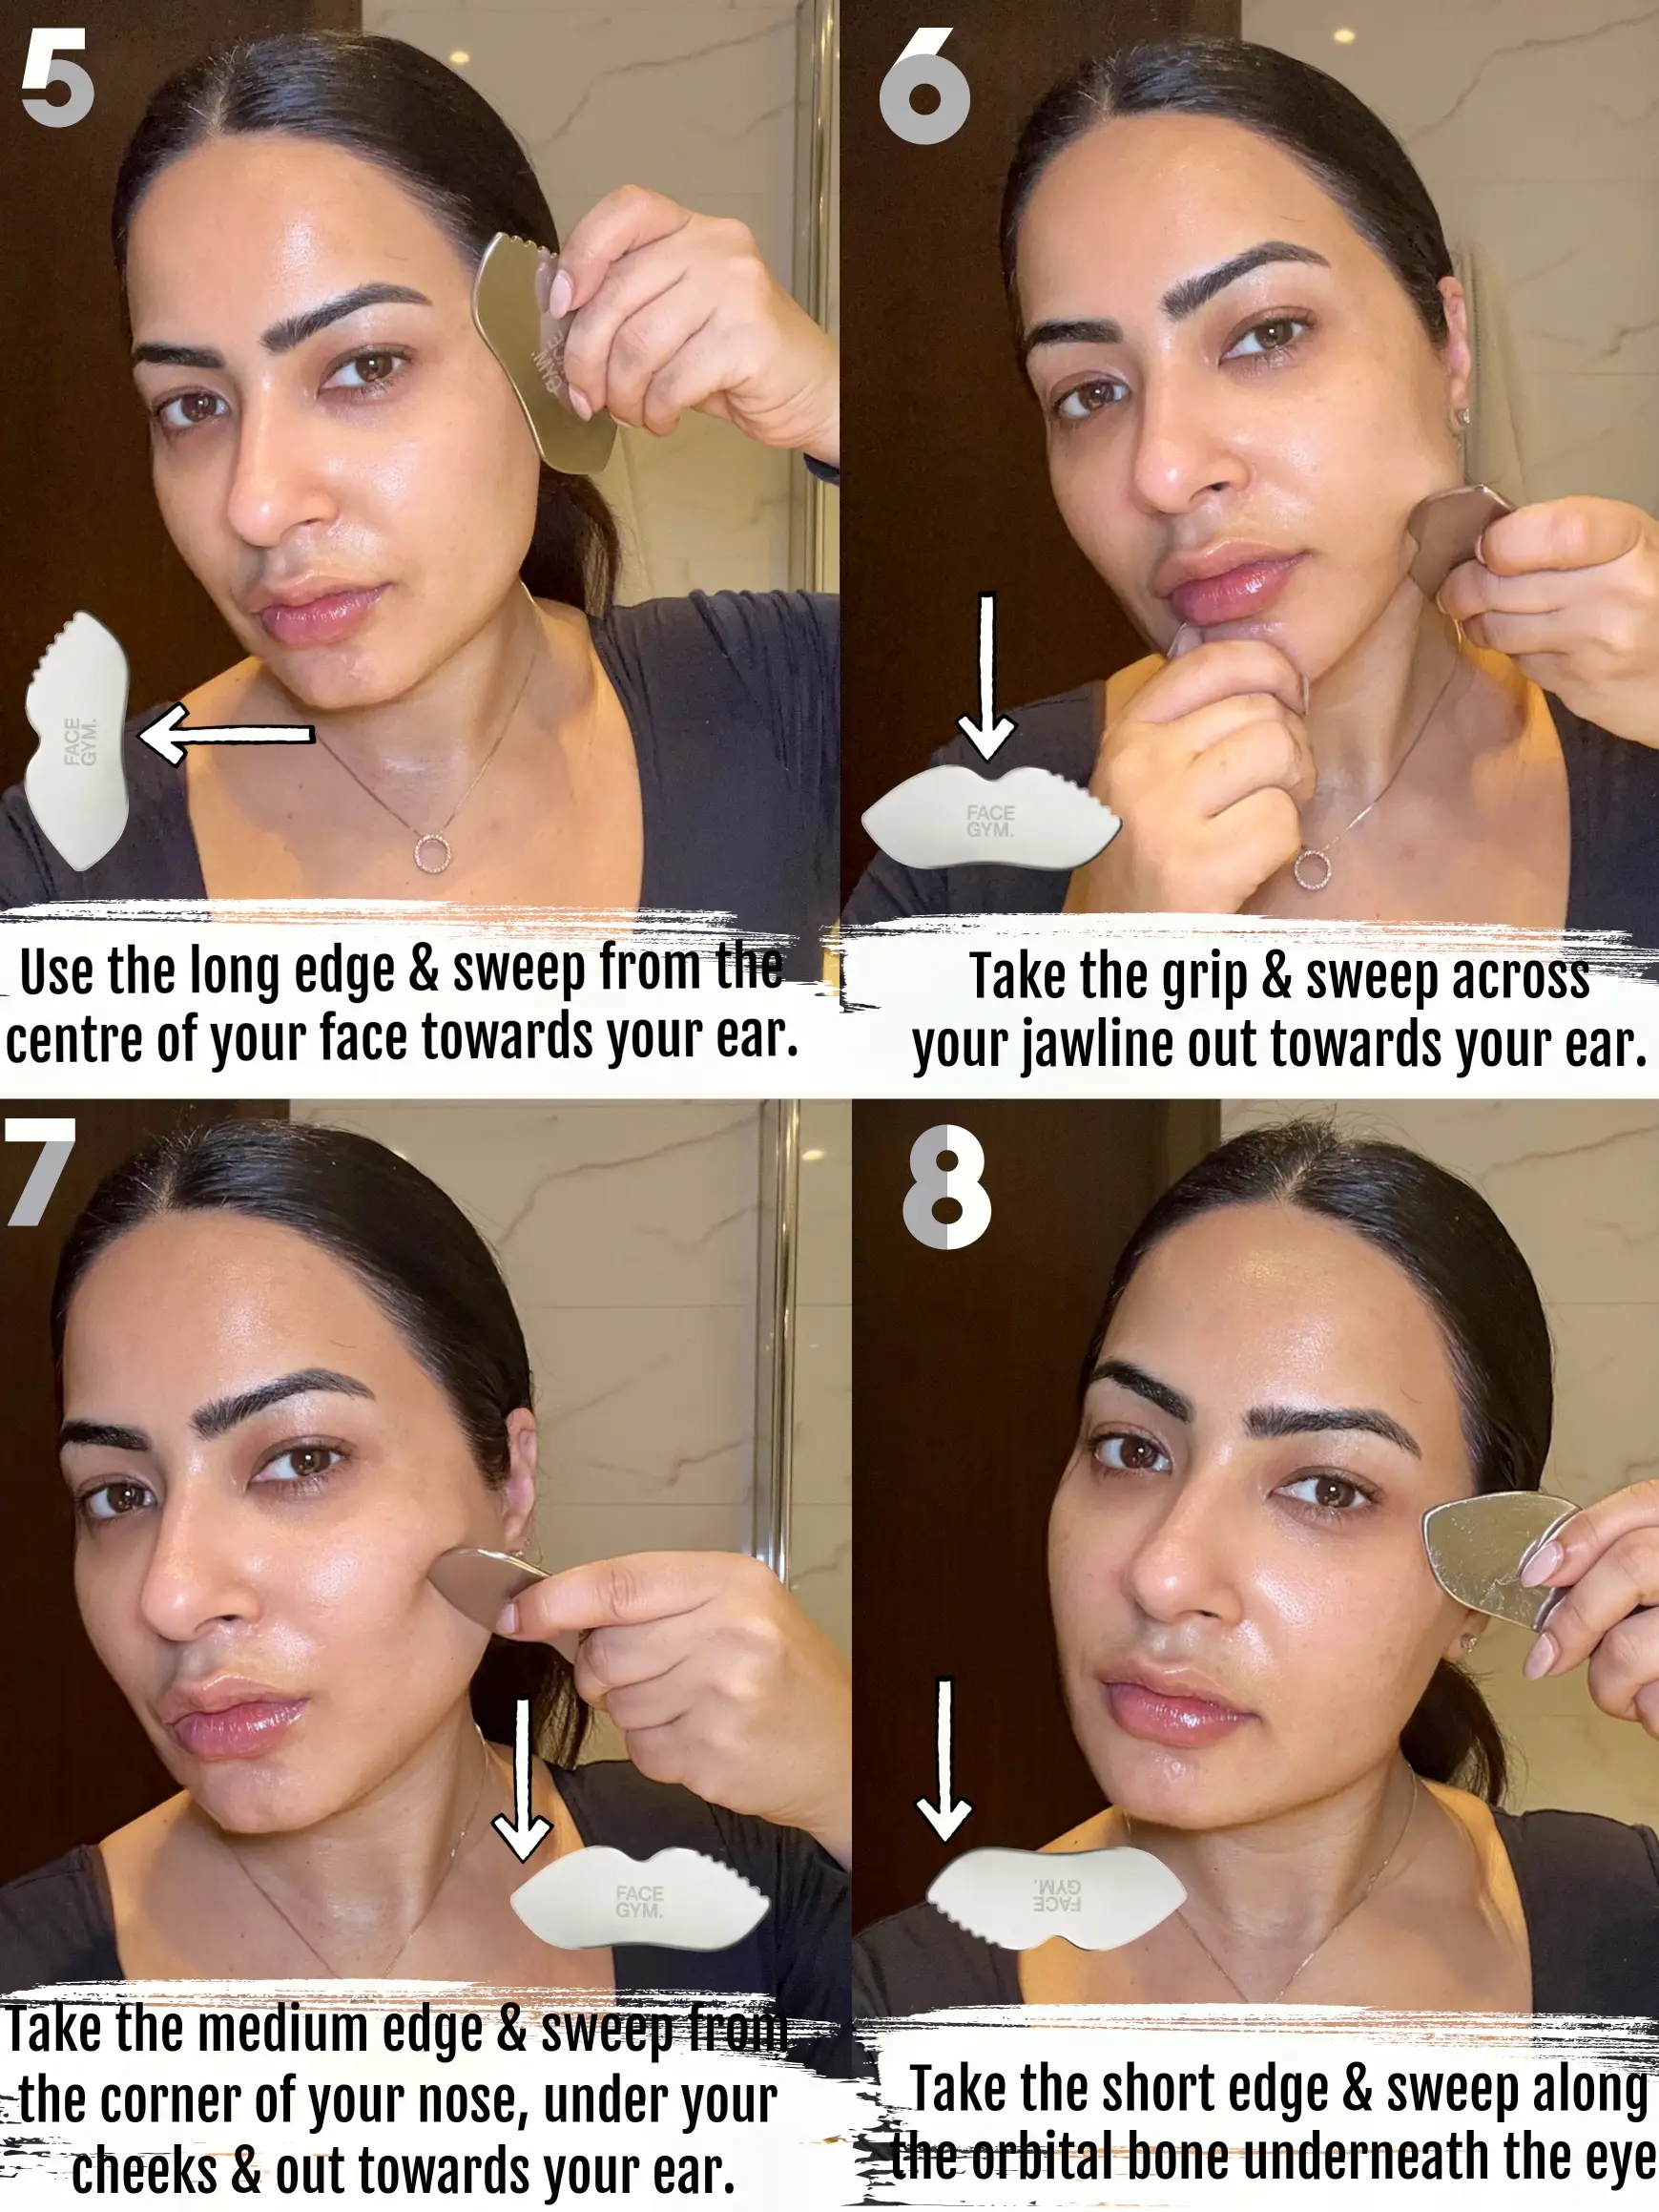 How To: Lift & Sculpt the Face?, Gallery posted by Zenia Chopra